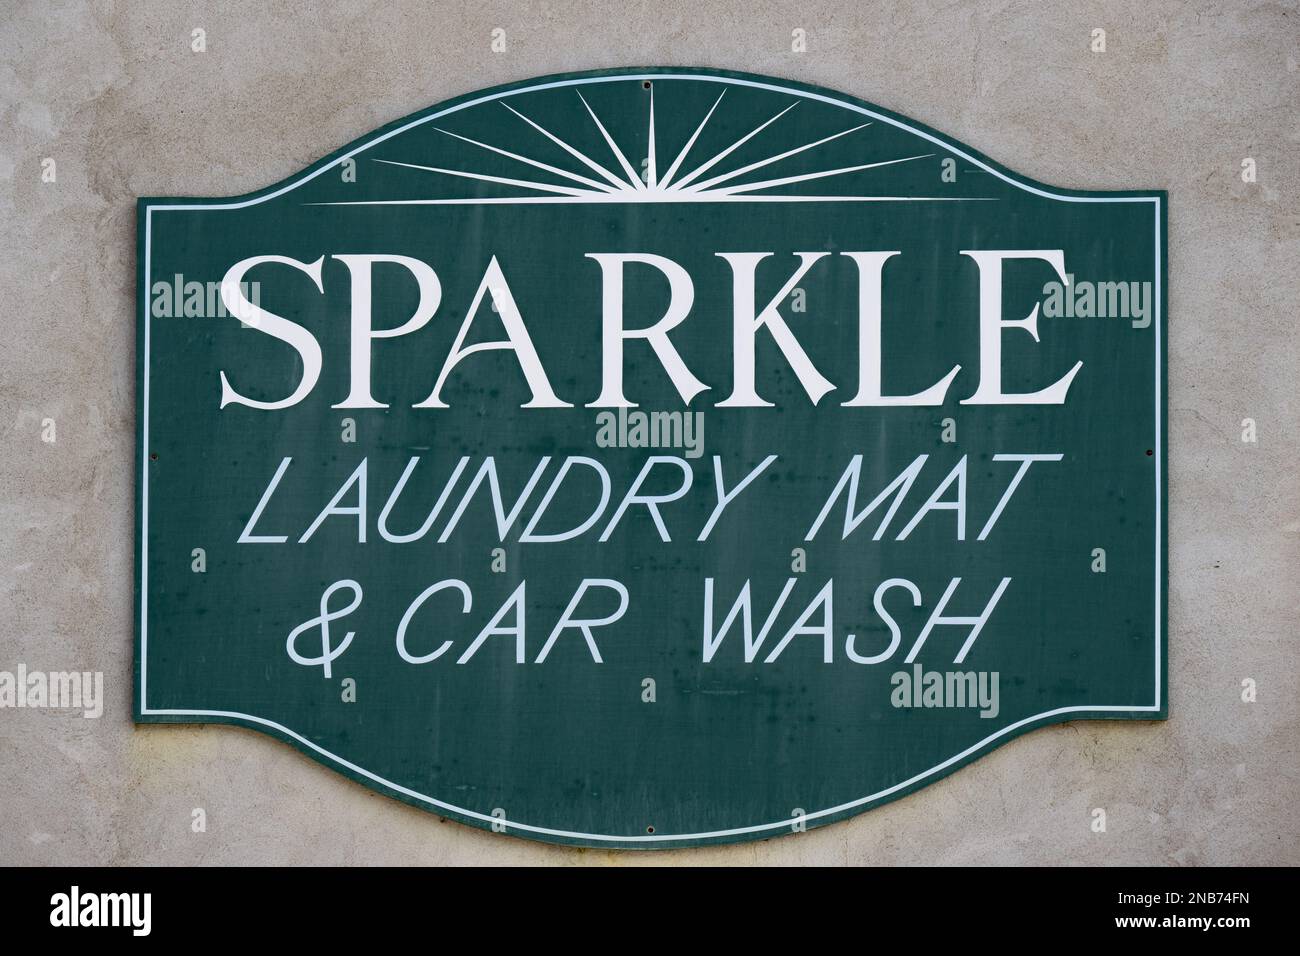 Sparkle Laundry Mat & Car Wash sign in Speculator, NY Stock Photo